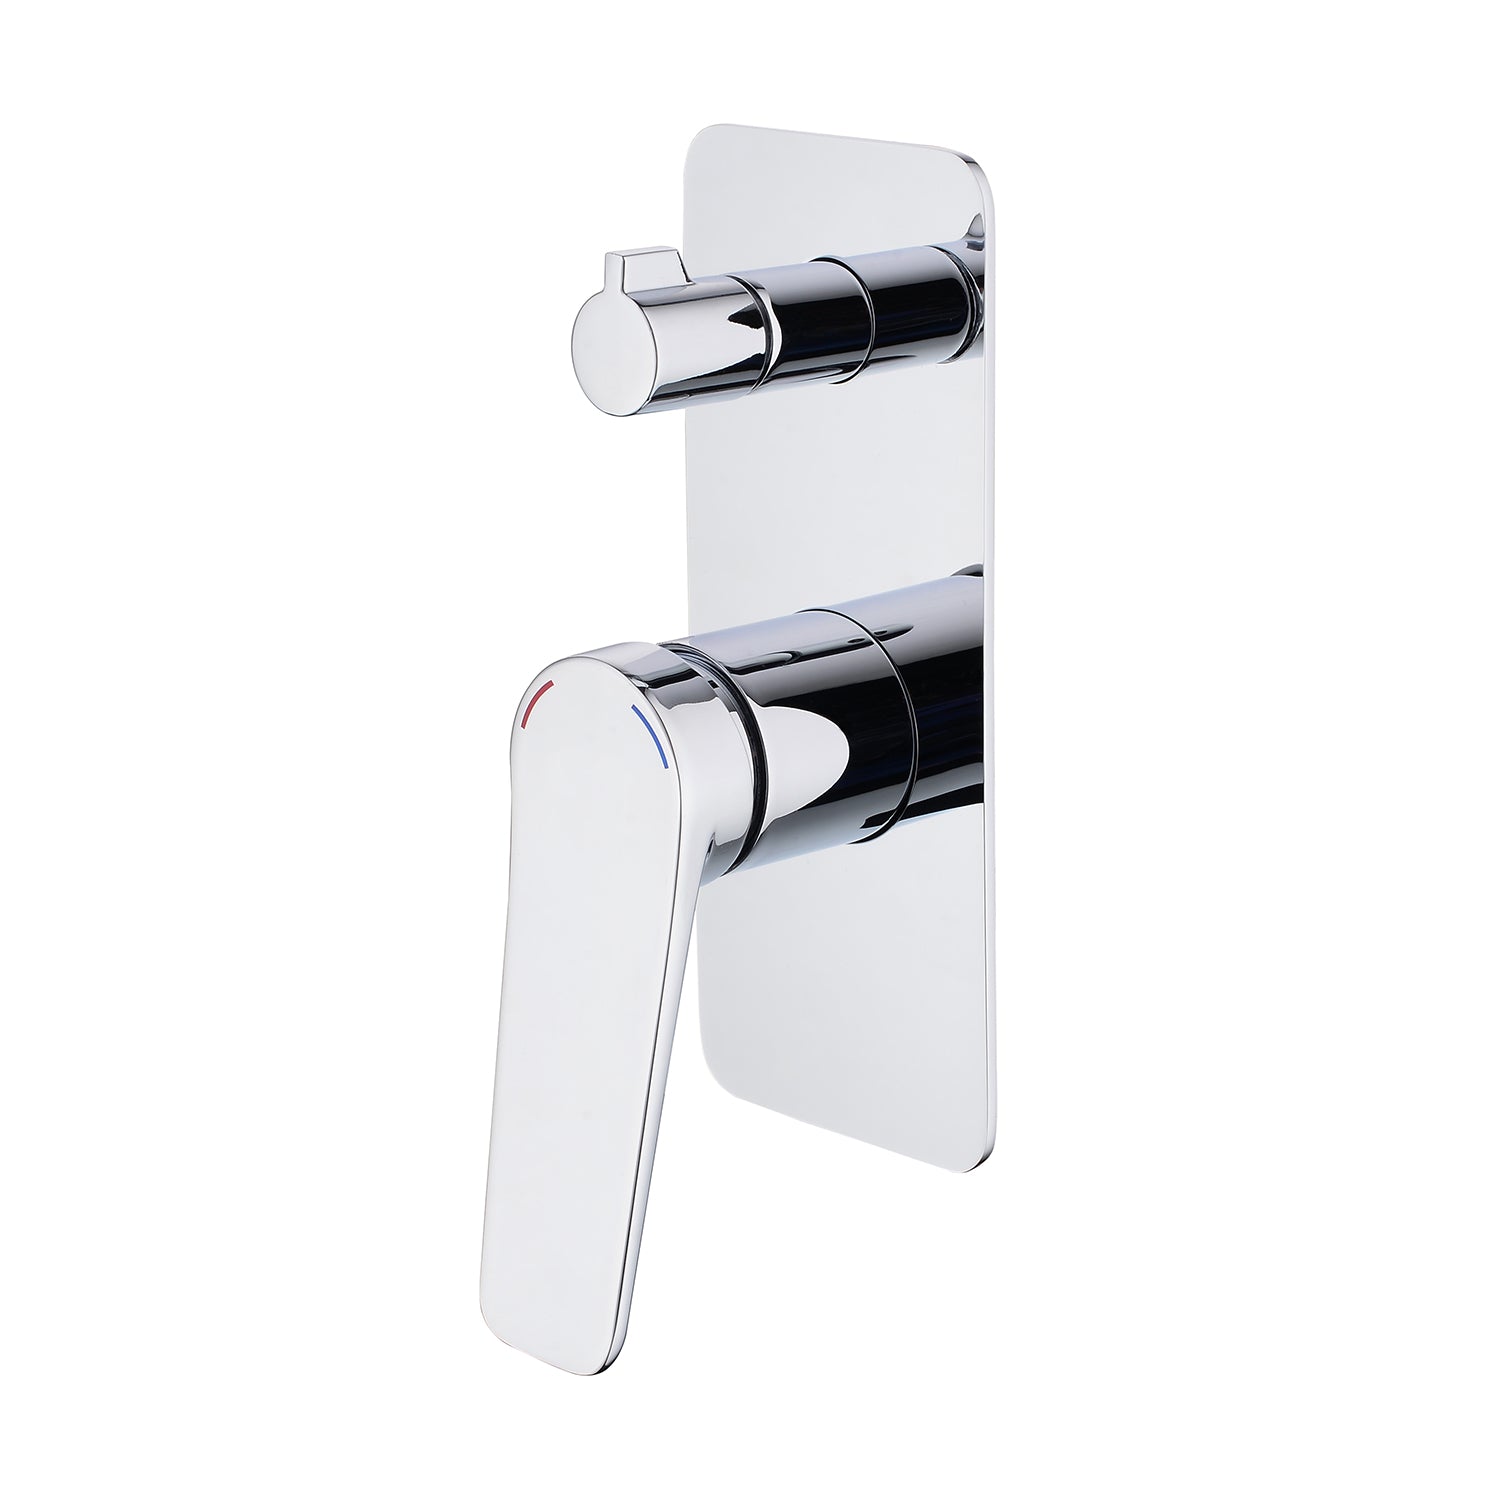 DAX Square Shower Valve with 2 Functions Chrome Finish (DAX-13556-CR)